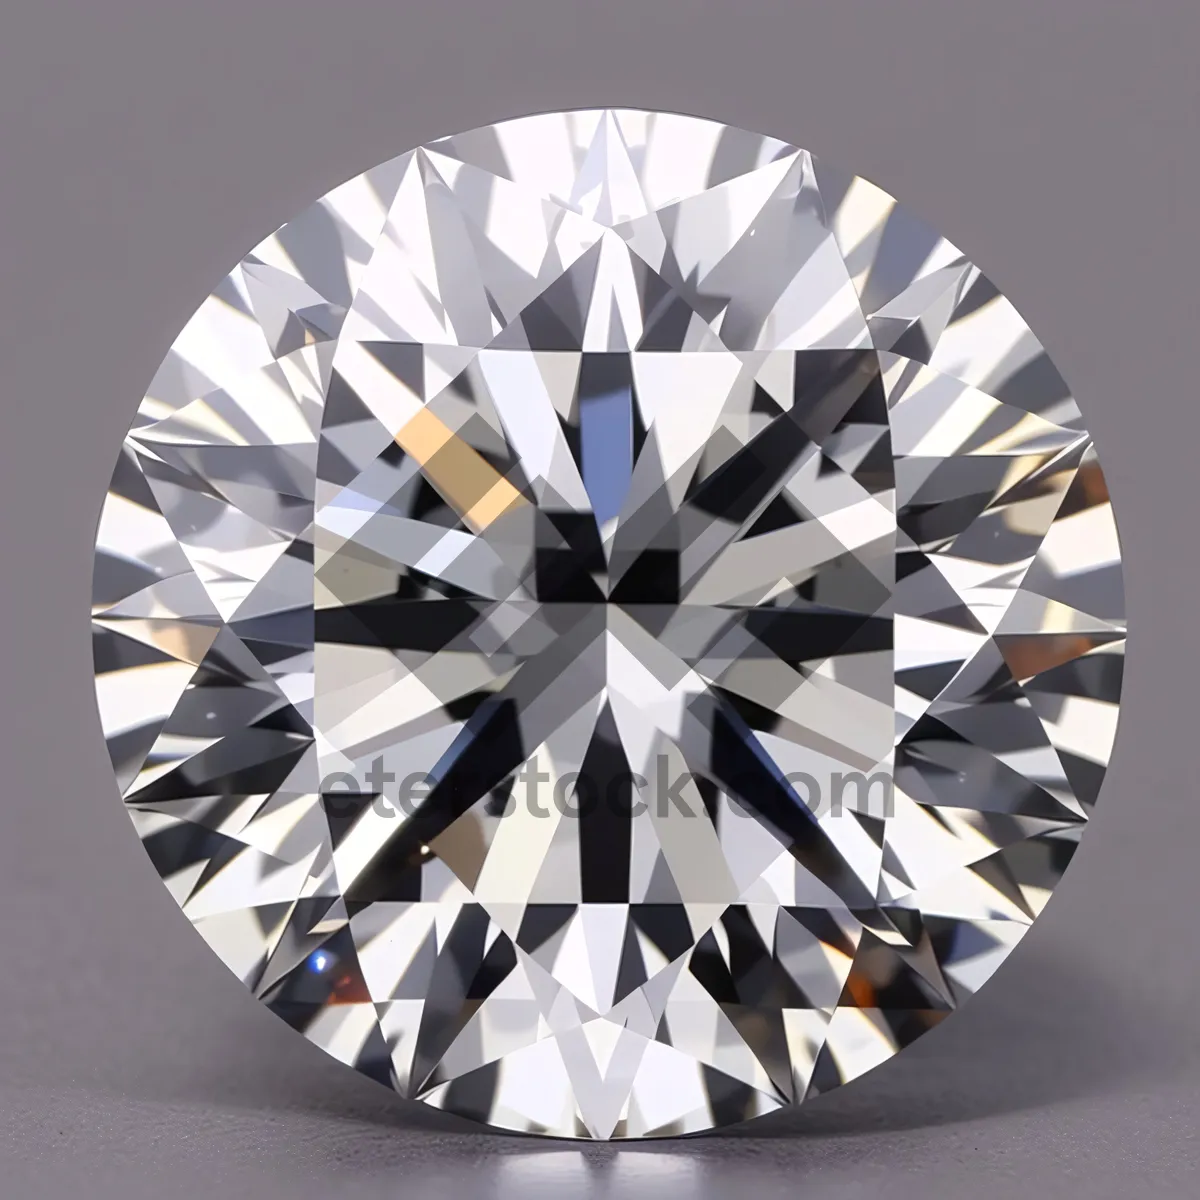 Picture of Shining Gem: Brilliant Round Diamond Crystal